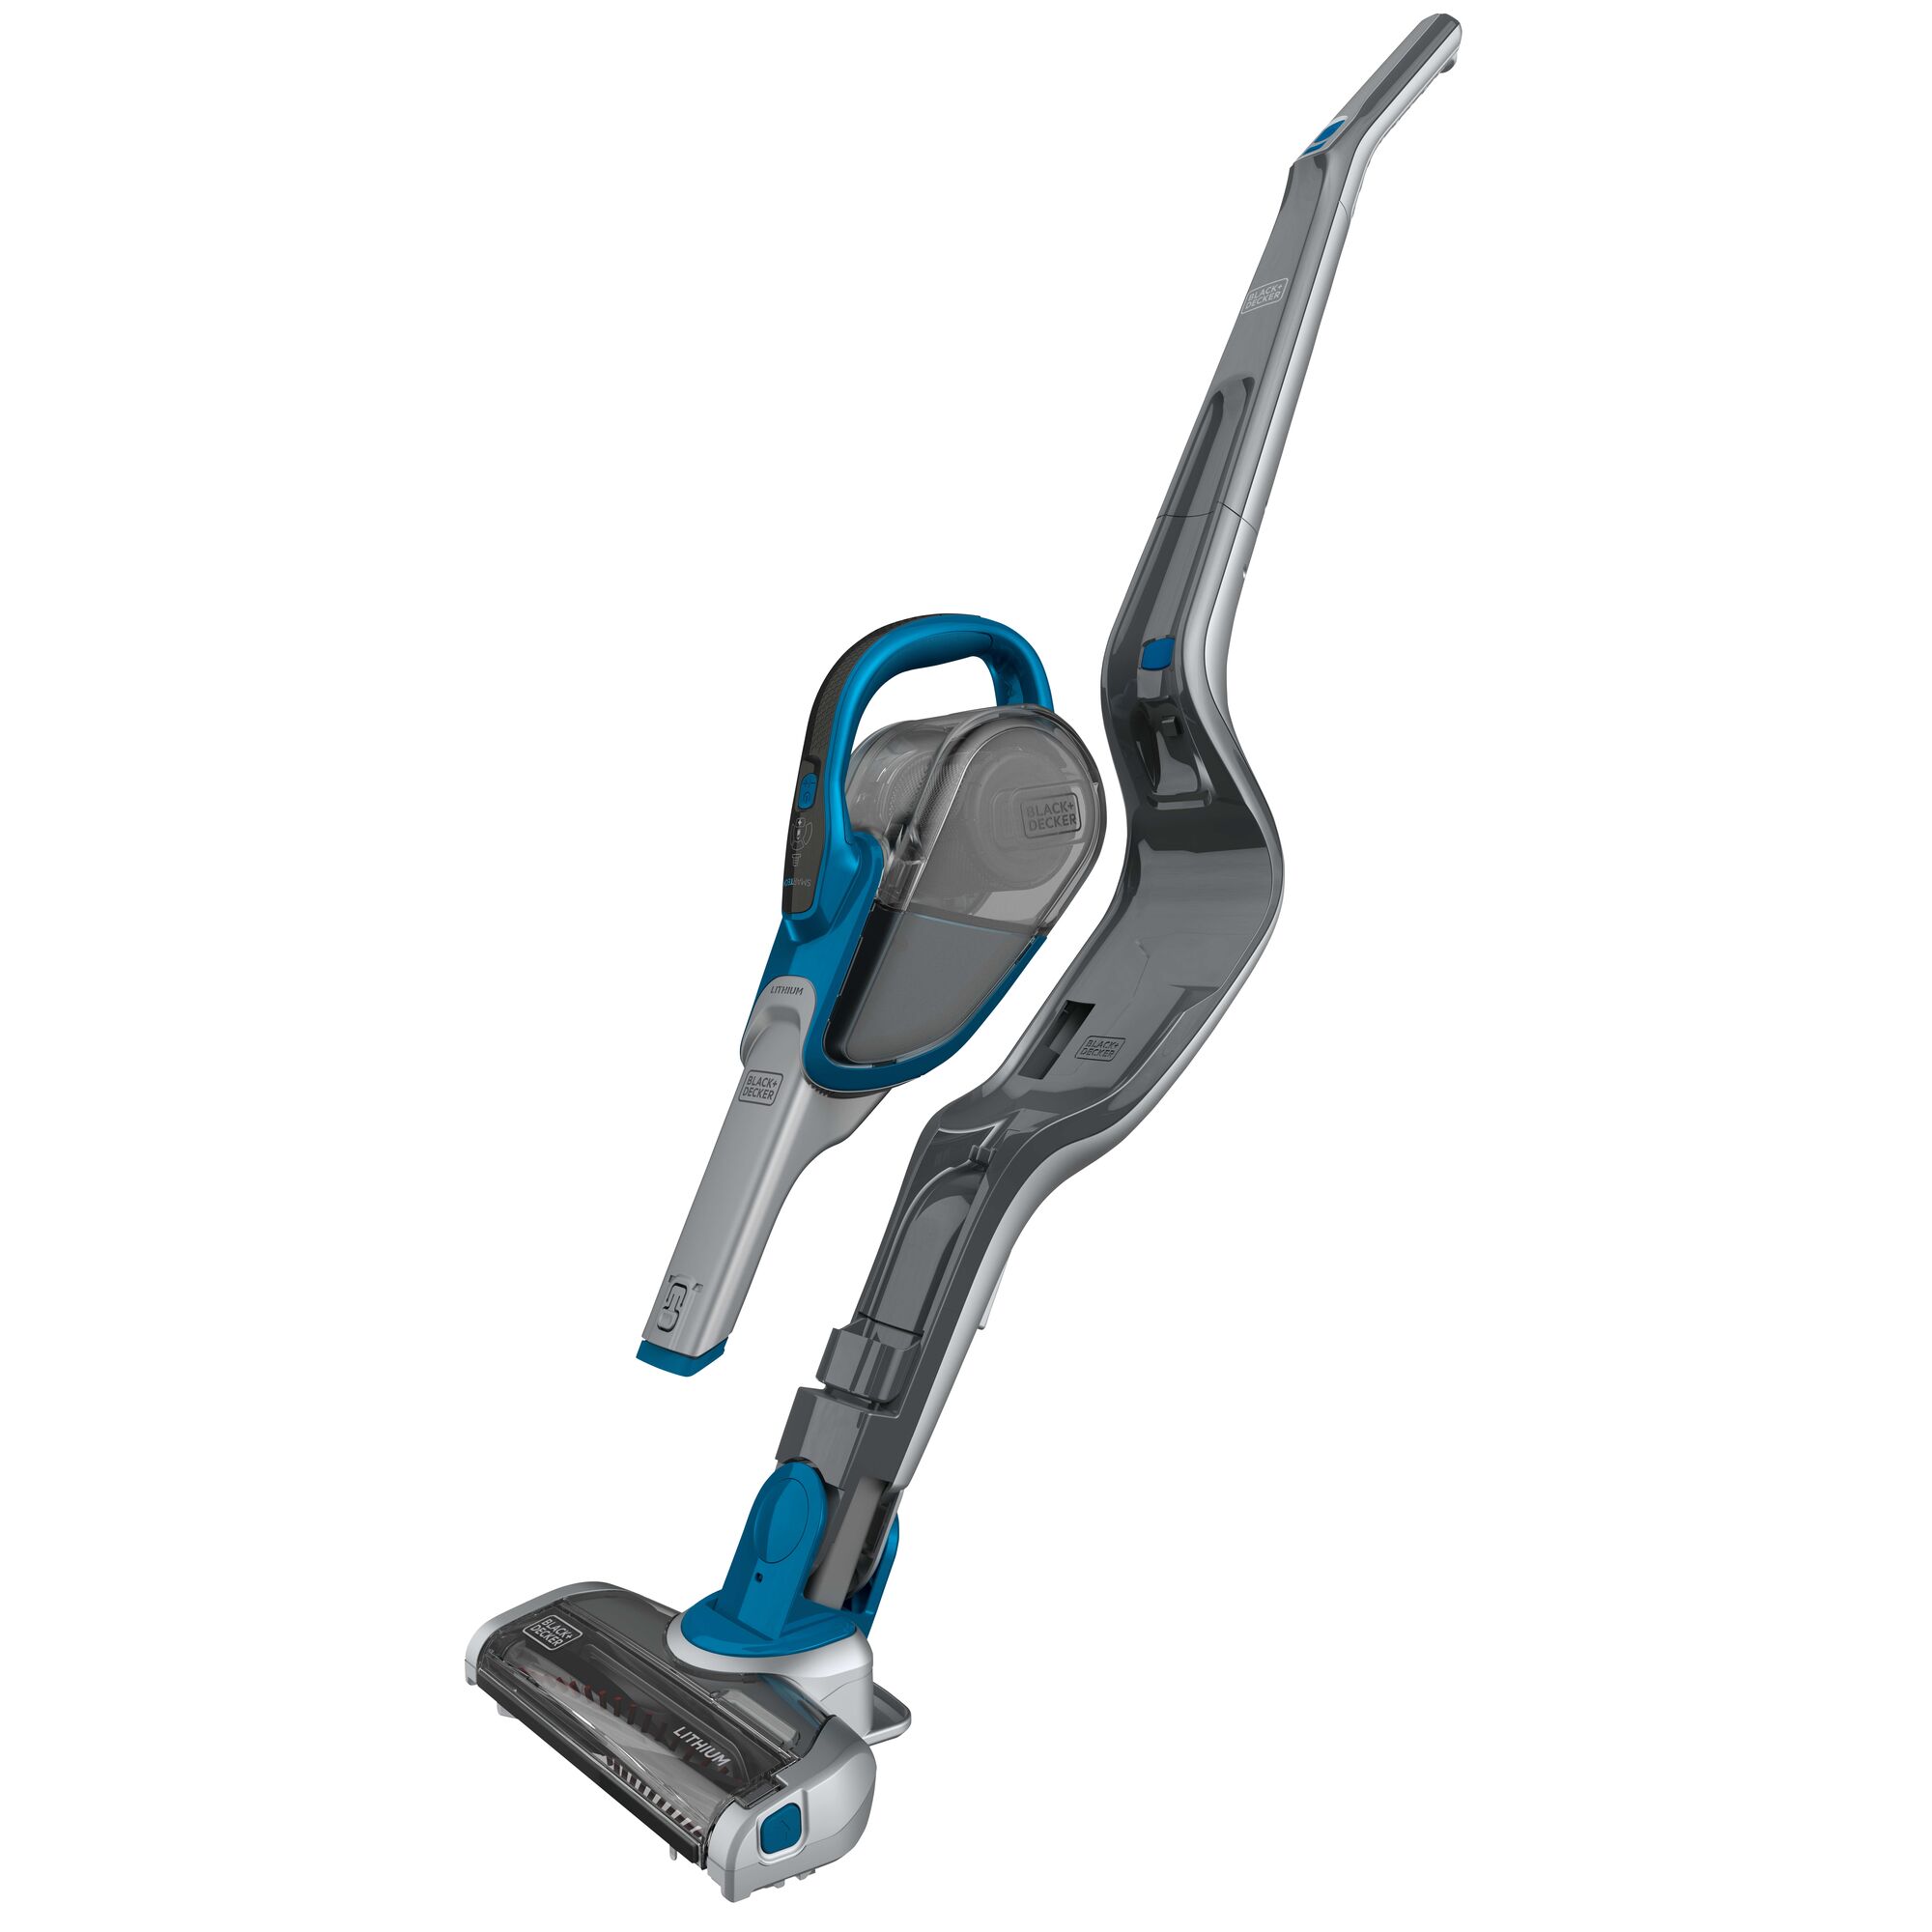 Cordless Lithium 2 in 1 Stick Vacuum deattached.